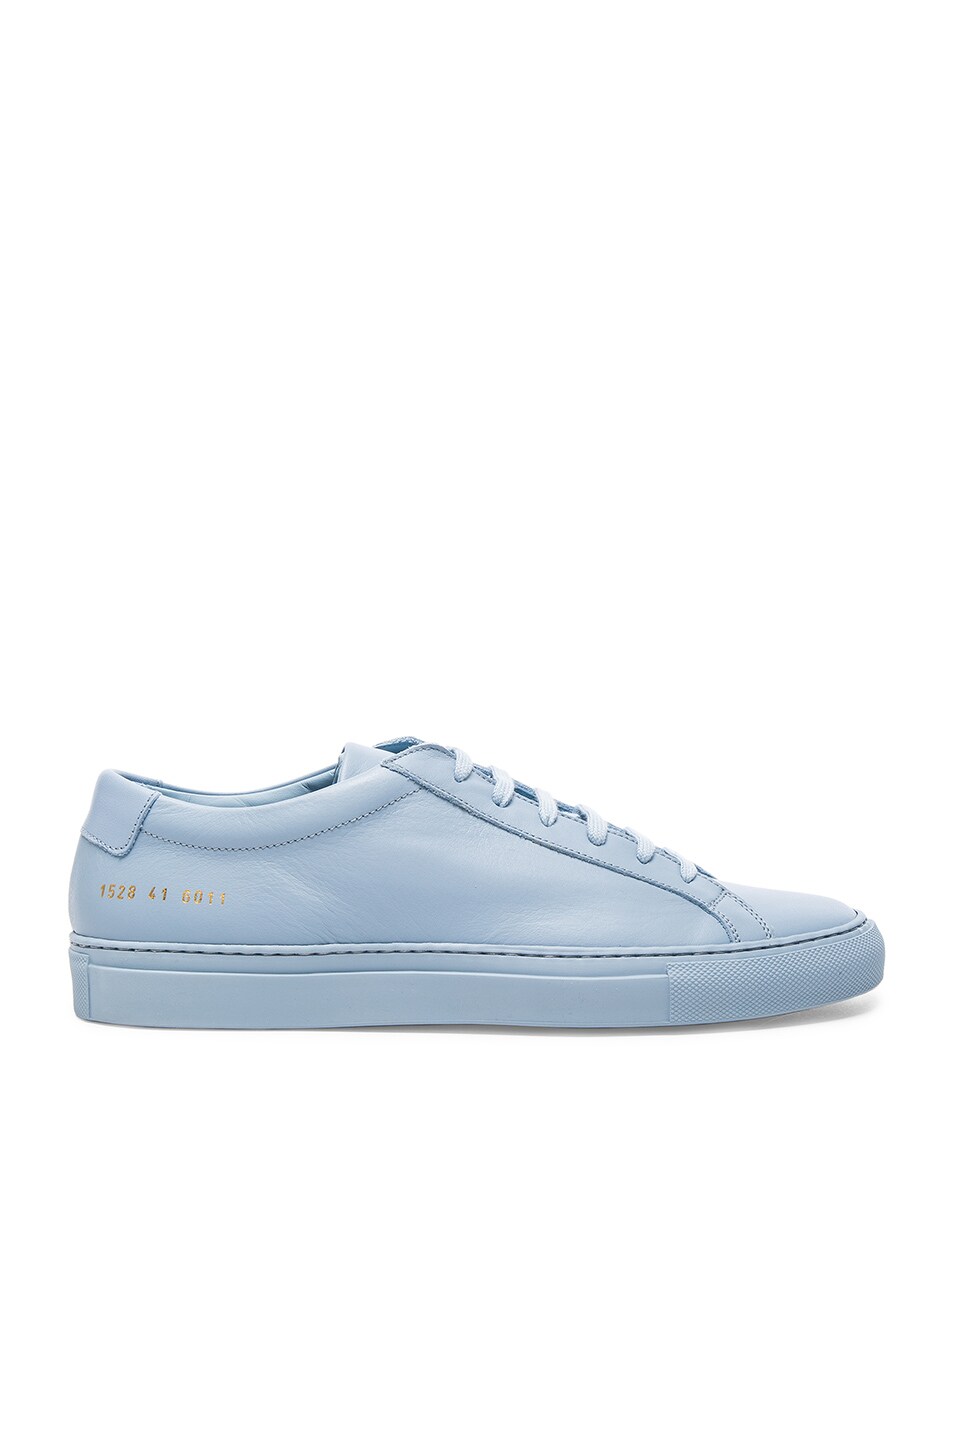 COMMON PROJECTS Original Achilles Leather Sneakers in Powder Blue ...